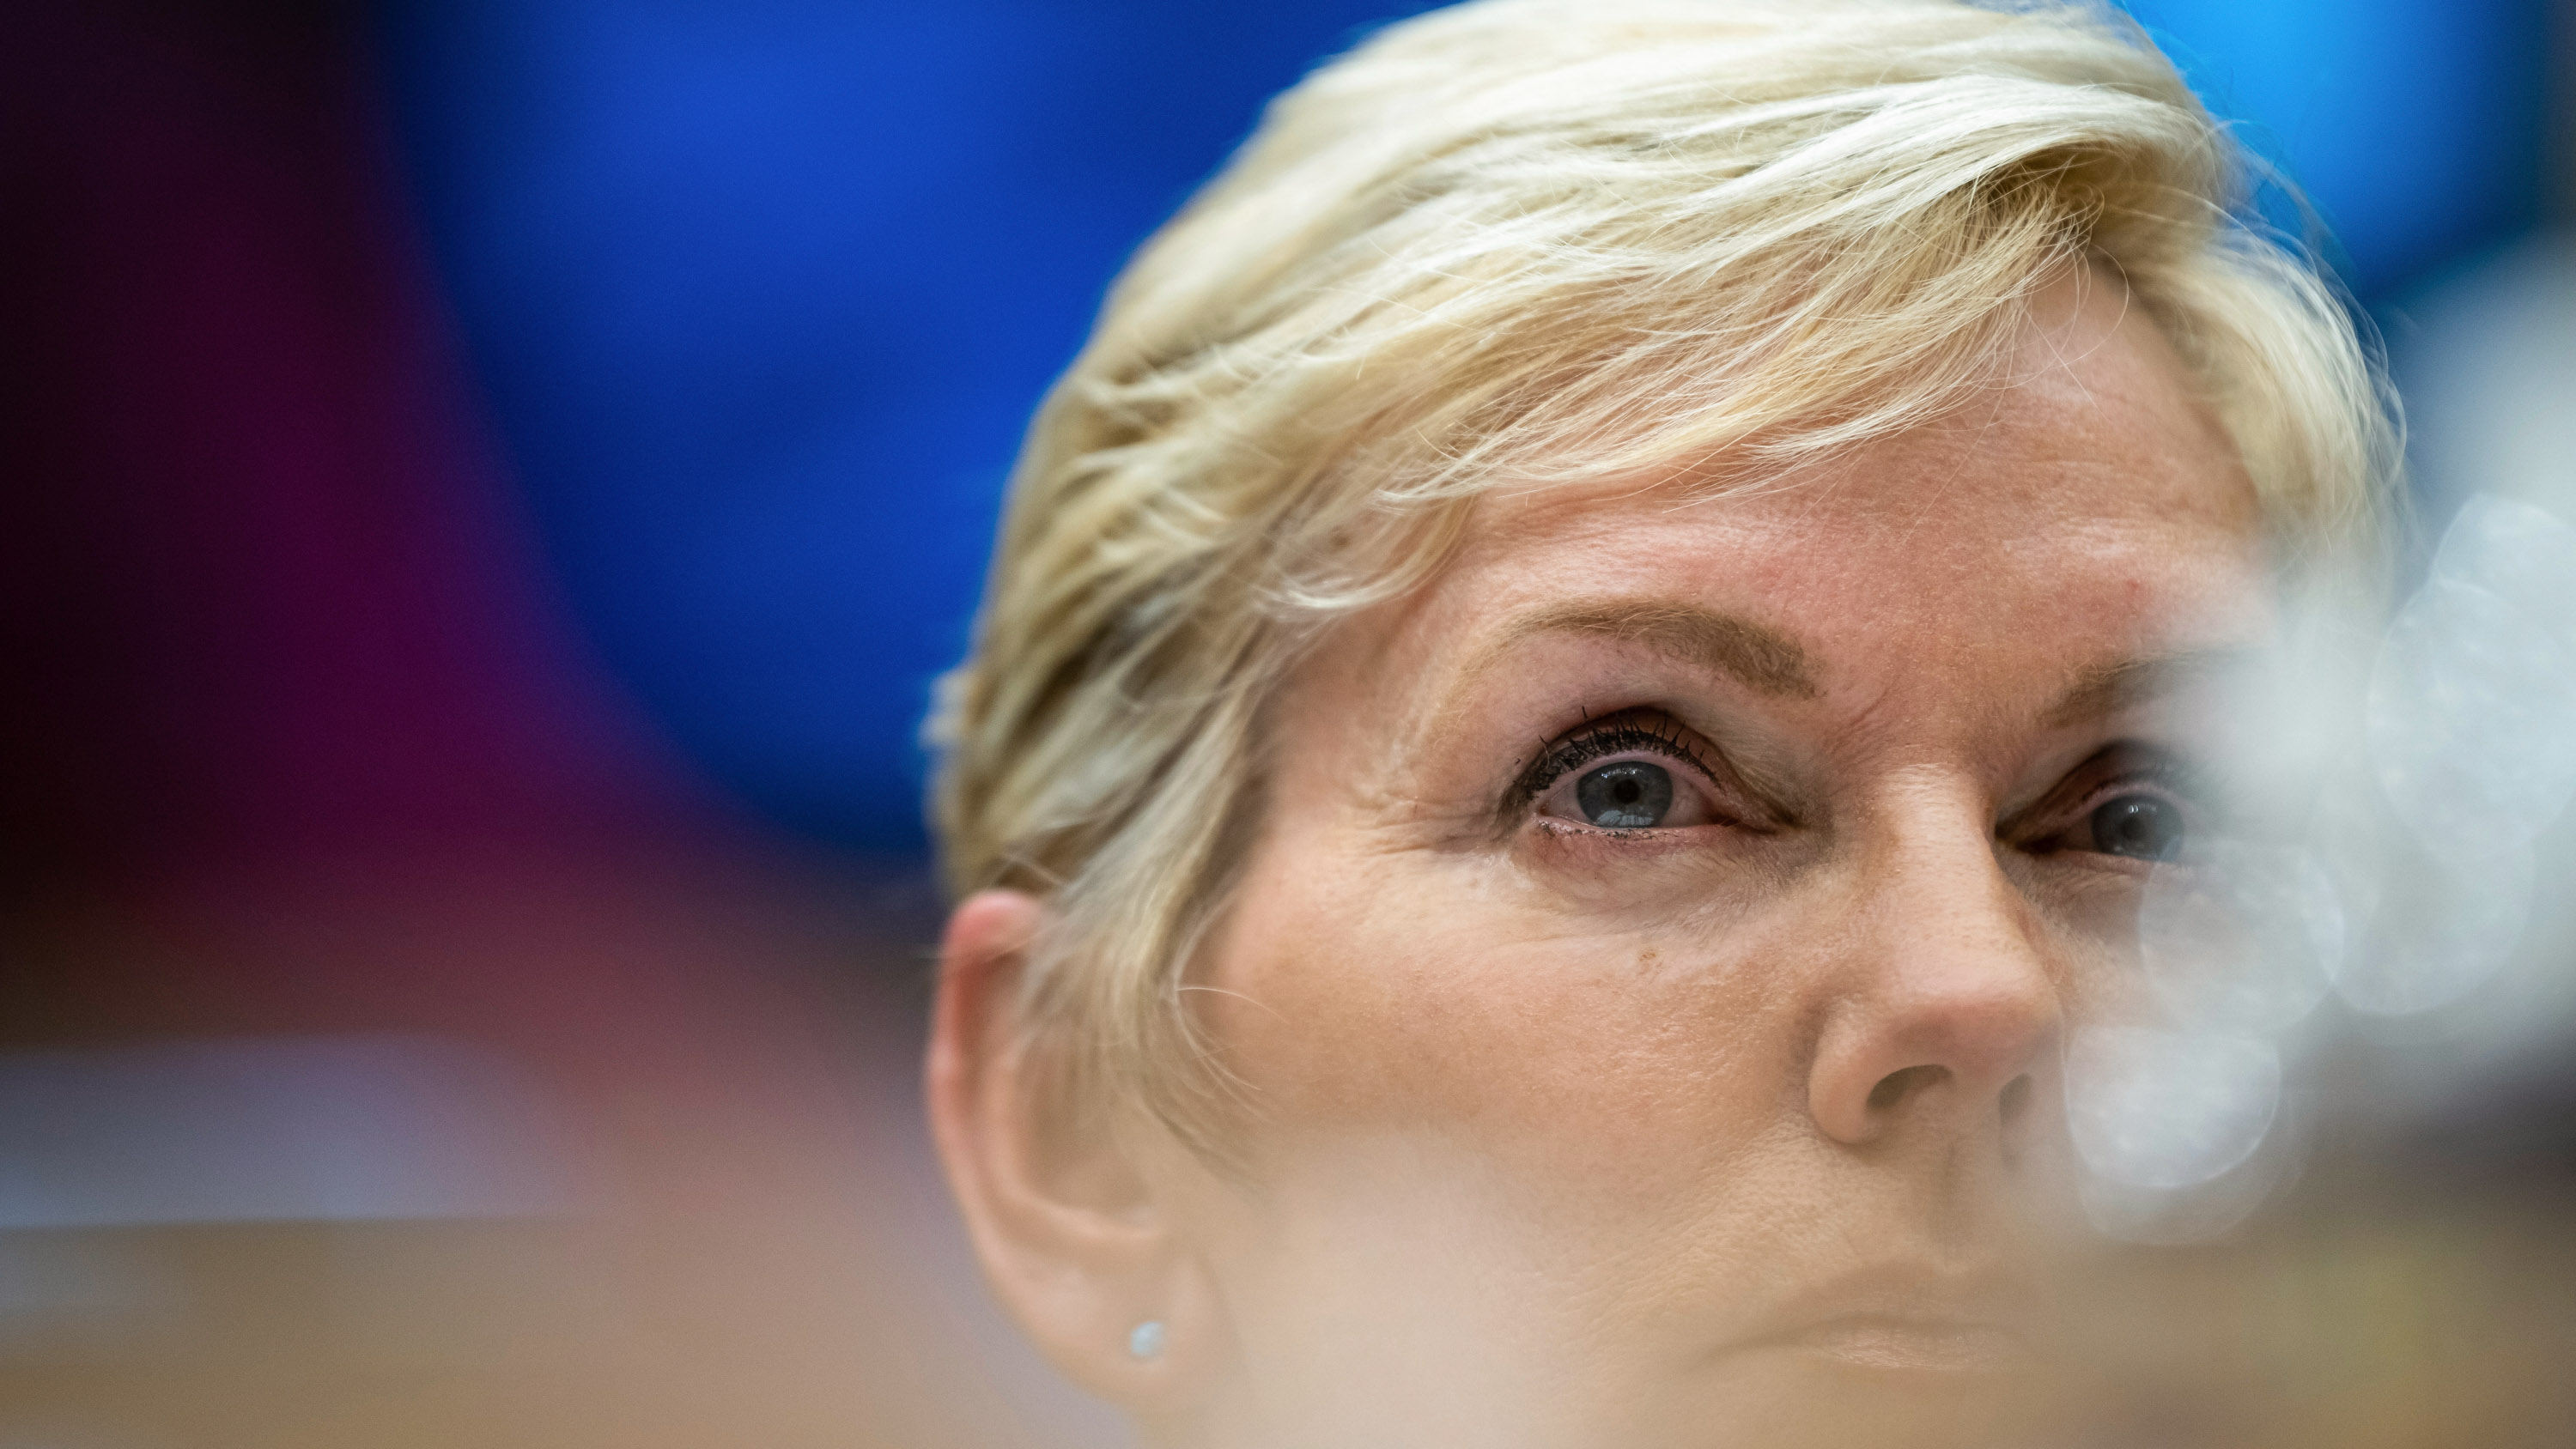 Secretary of Energy Jennifer Granholm seen close up on her face with a hazy, soft depth of field